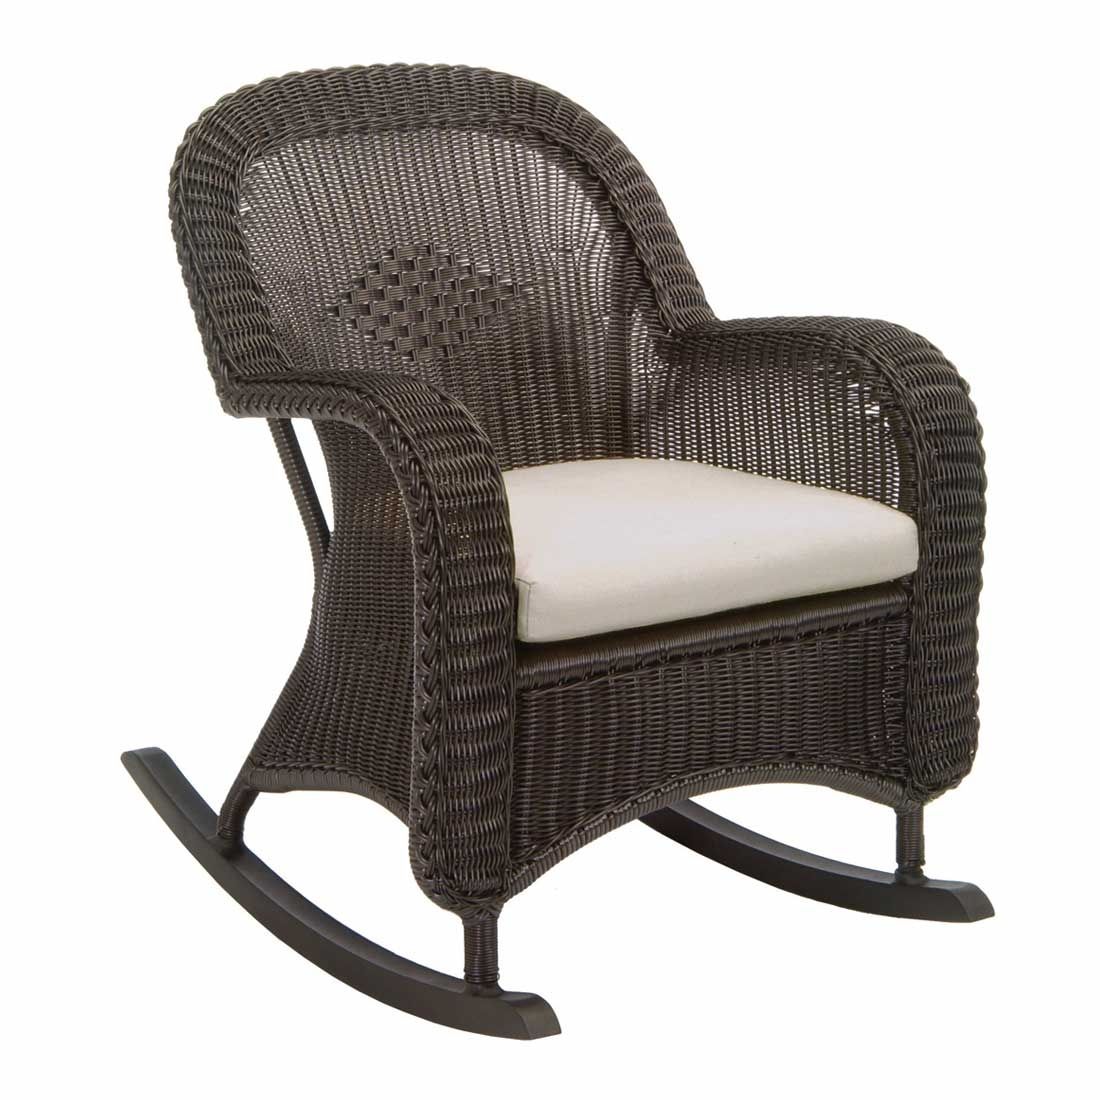 Classic Outdoor Wicker Rocking Chair In Wicker Rocking Chairs For Outdoors (Photo 15 of 15)